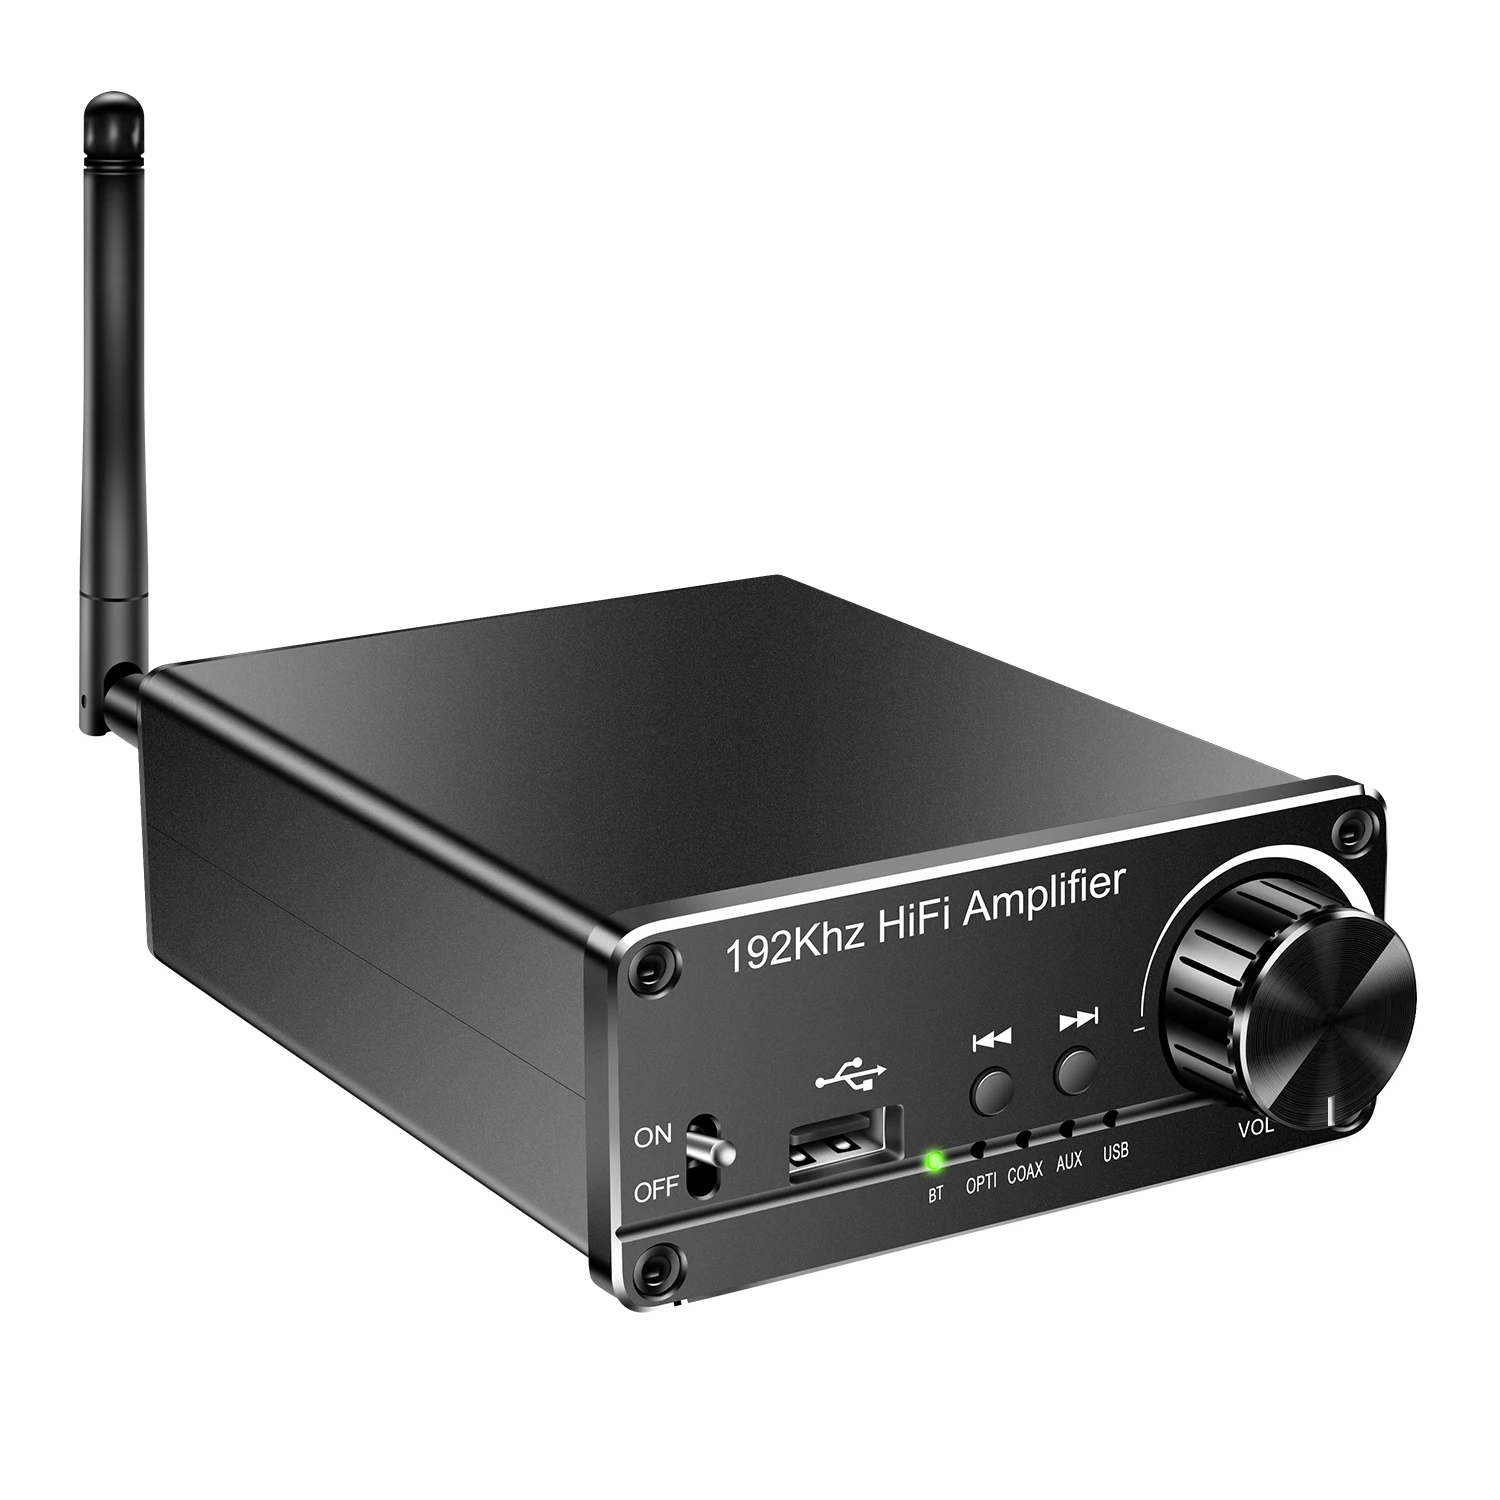 

New Arrival Wireless 192Khz 60W DAC Audio Amplifier Support AUX/USB/Optical/Coaxial to RCA Digital-to-Analog HIFI Amplifier